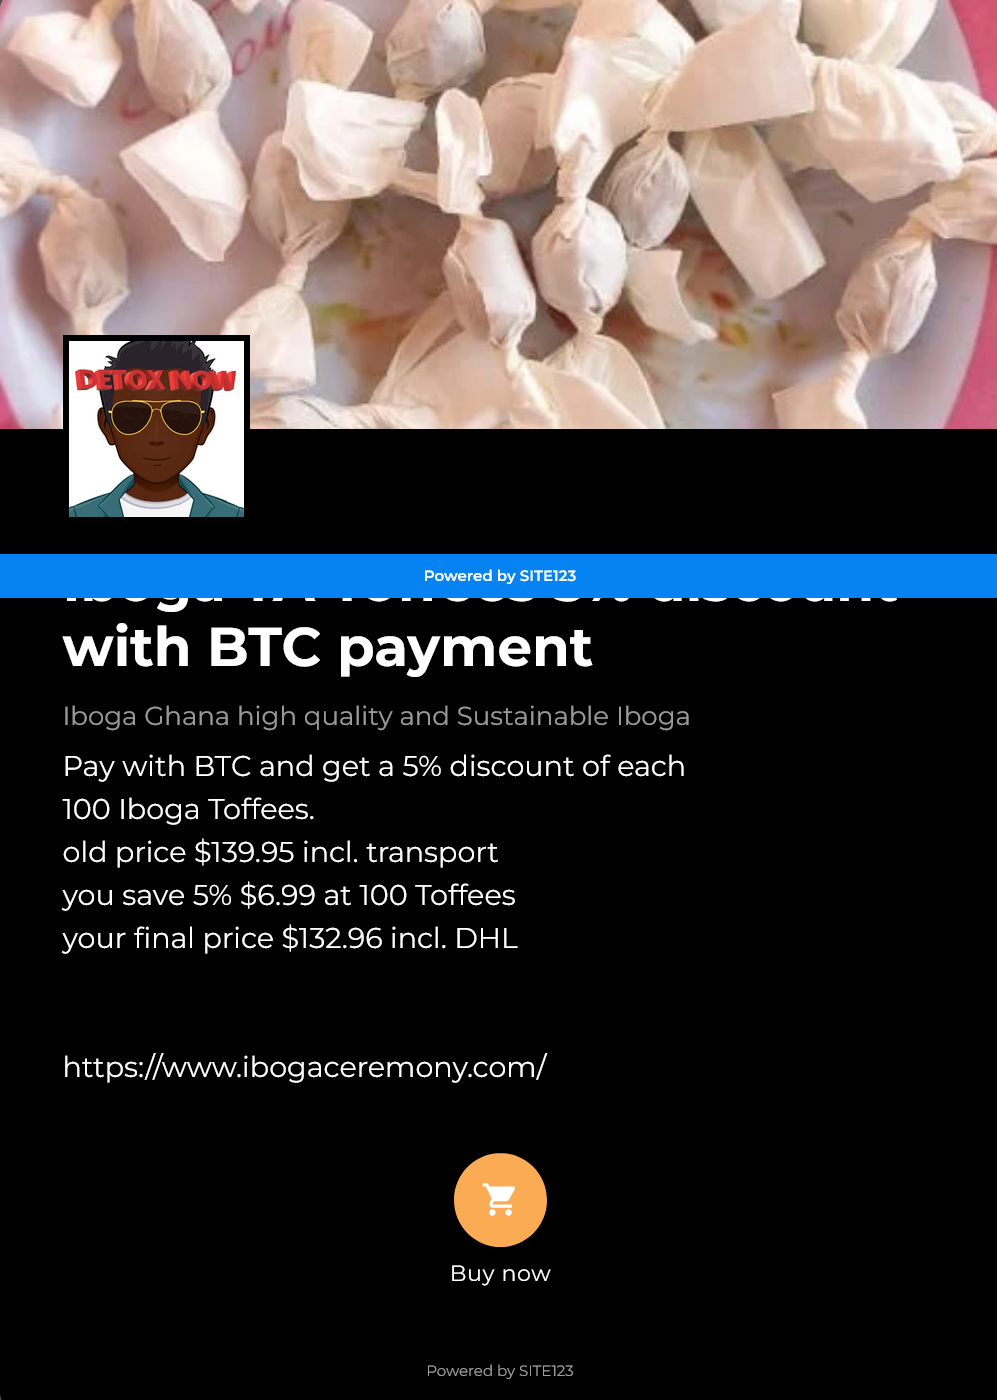 Iboga TA Toffees 5% discount with BTC payment